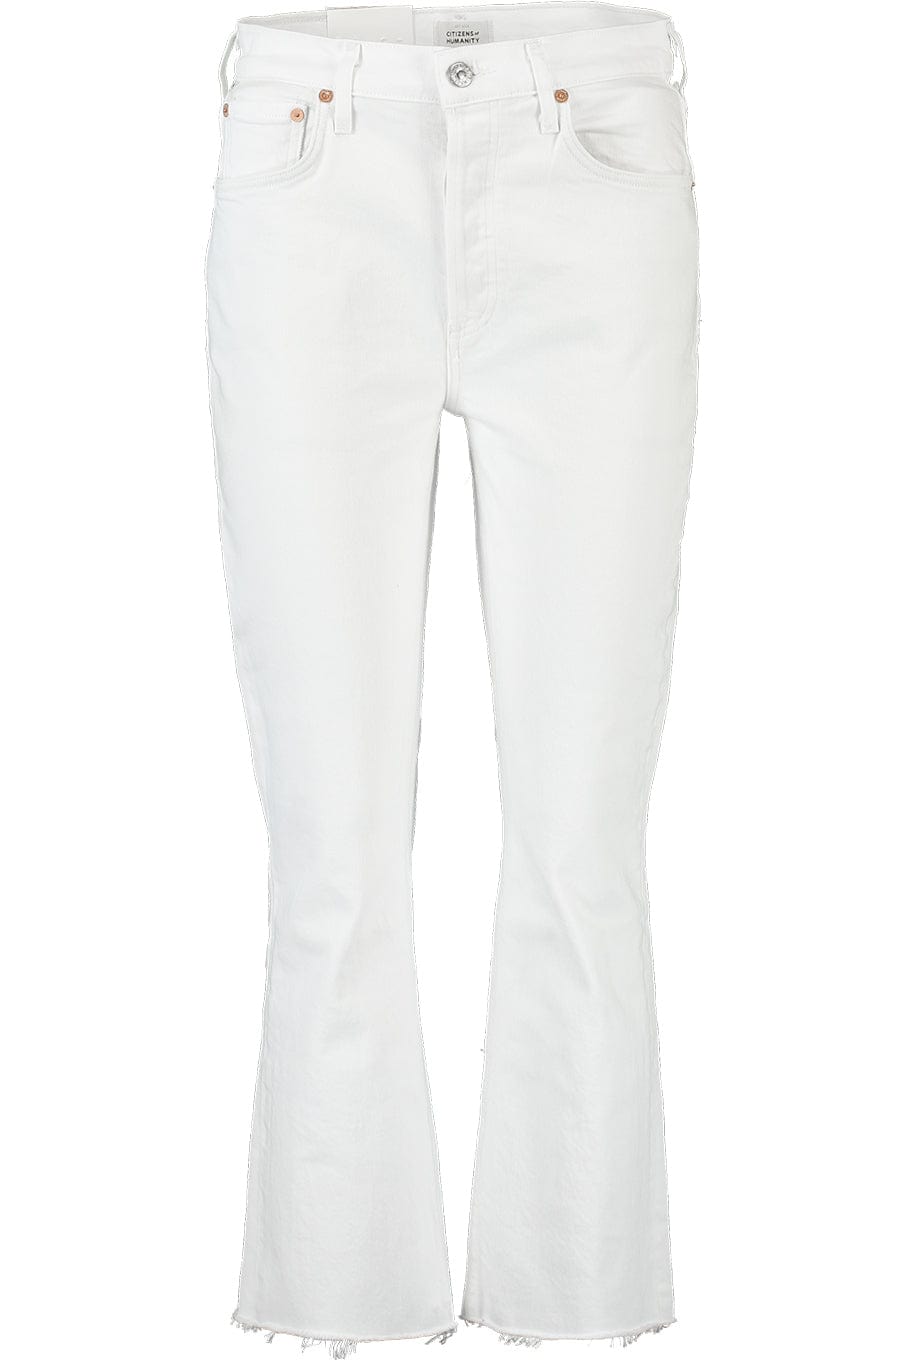 CITIZENS of HUMANITY-Isloa Cropped Boot Pant - Plaster-